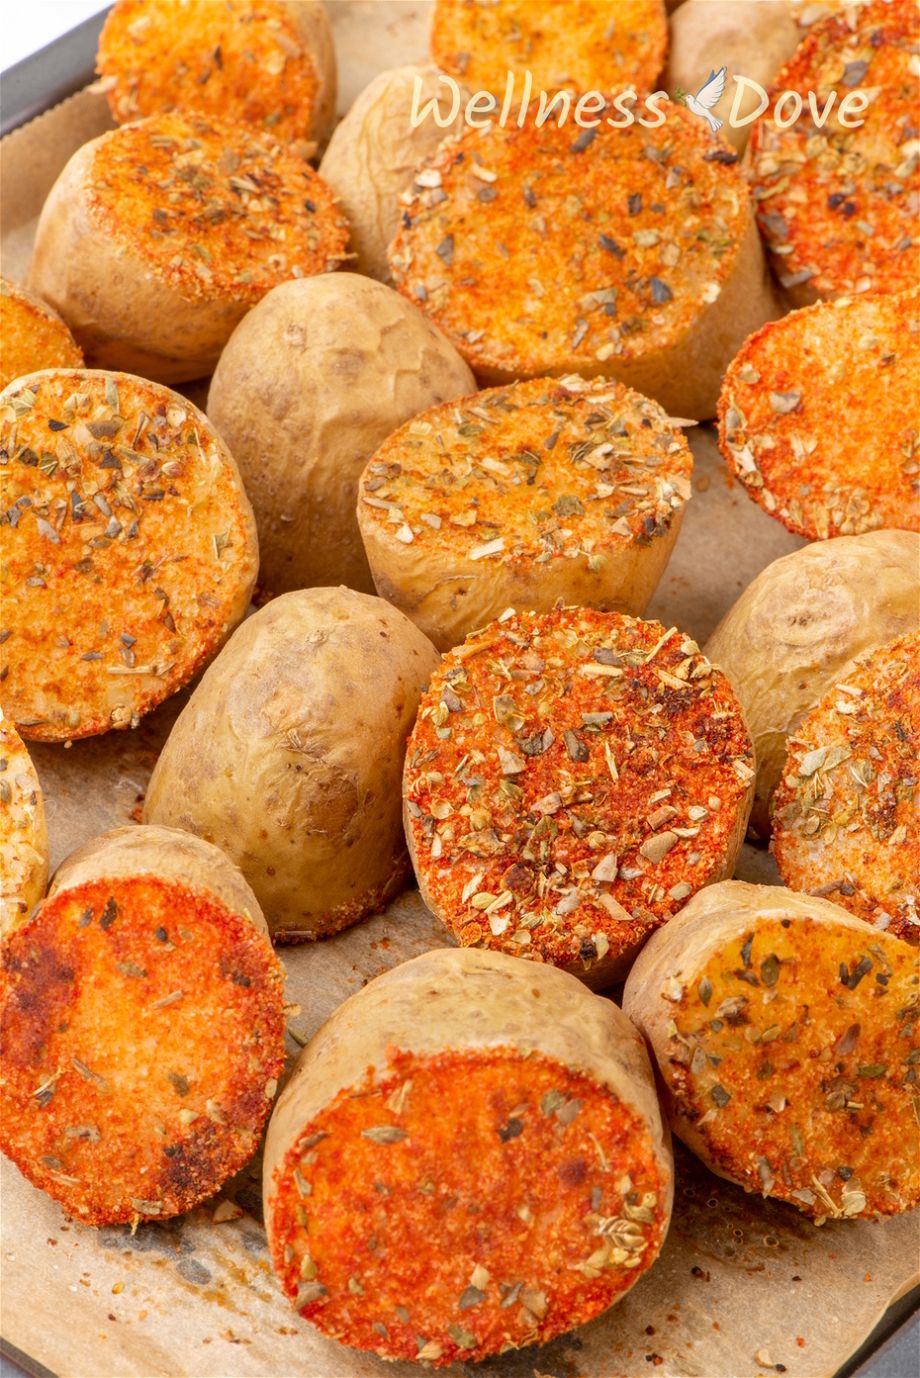 a close up view of the the vegan oven baked potatoes with herbs